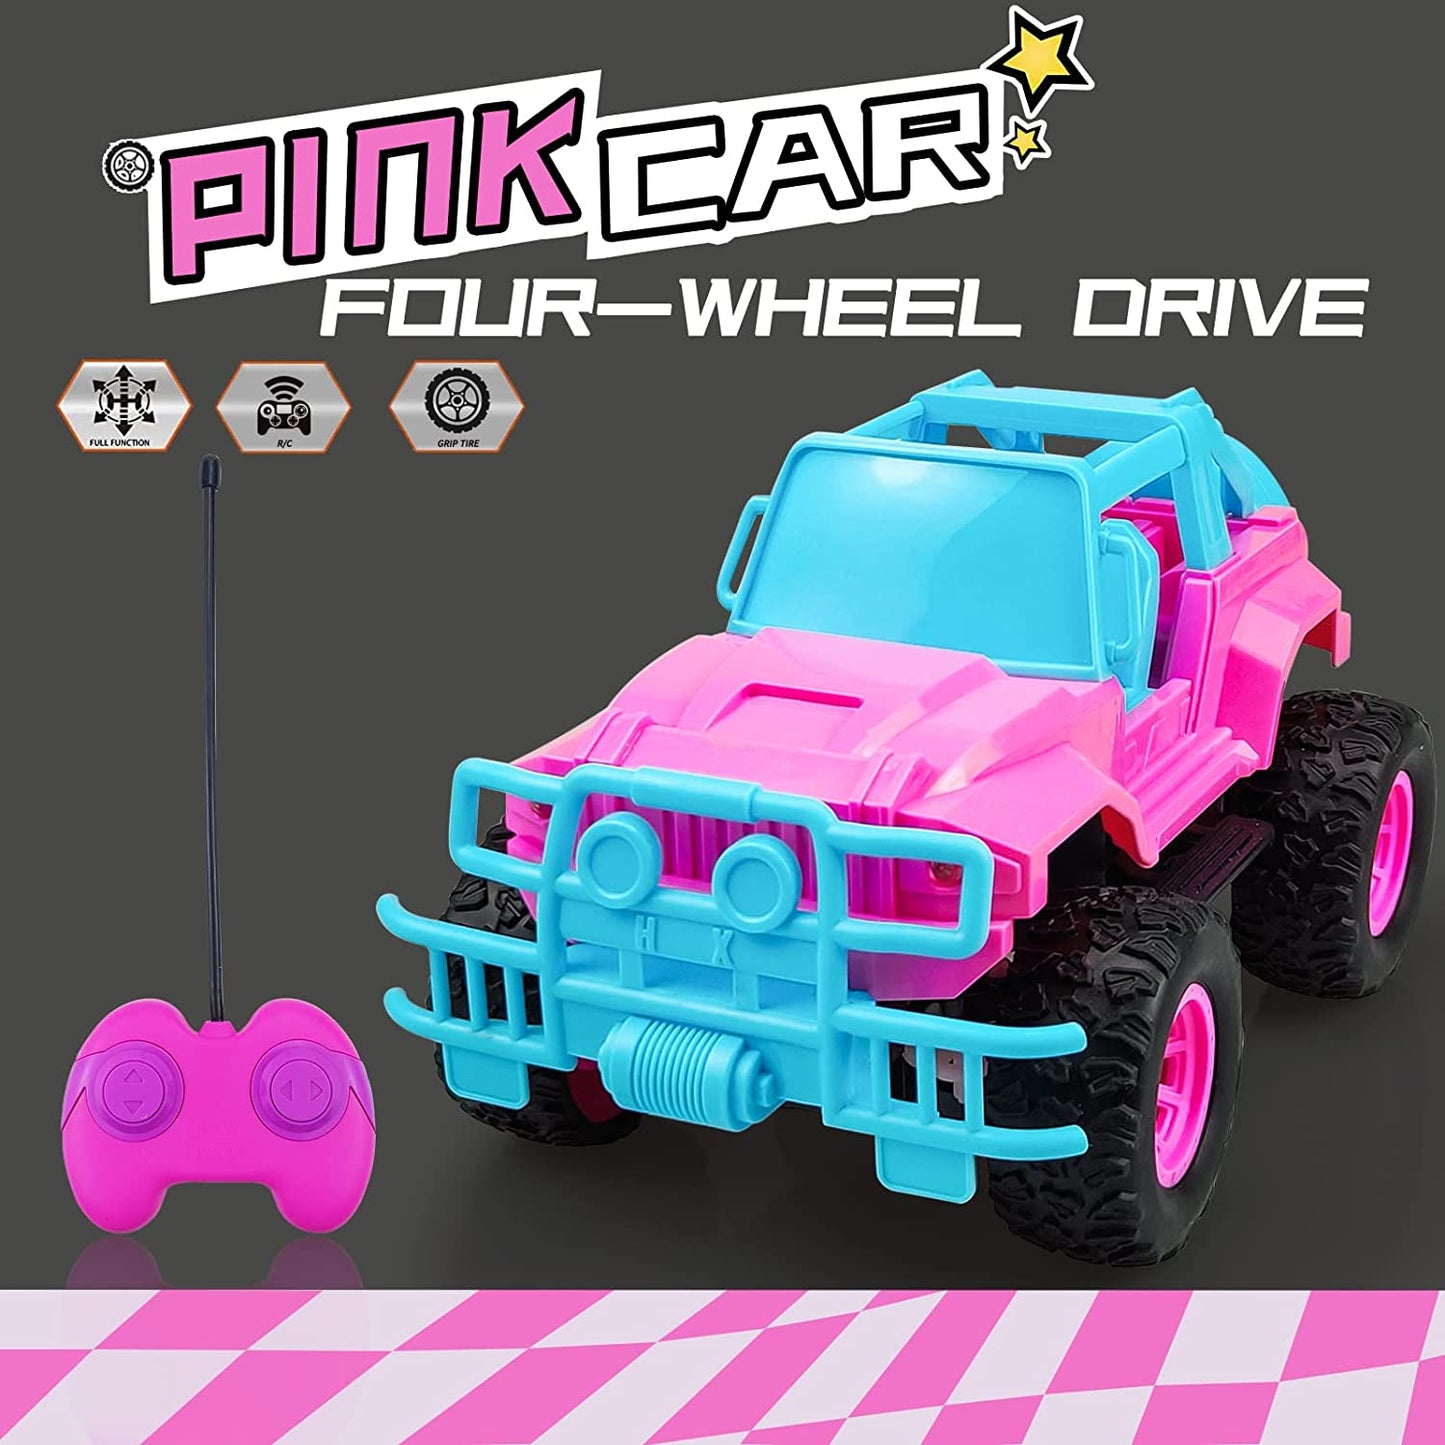 Remote Control Car for Girls - Rc Cars Toys for 6 + Year Old Girls Boys, Pink Remote Control Car 1:20 Scale off Road Truck for Kids Princess Gifts(Pink)